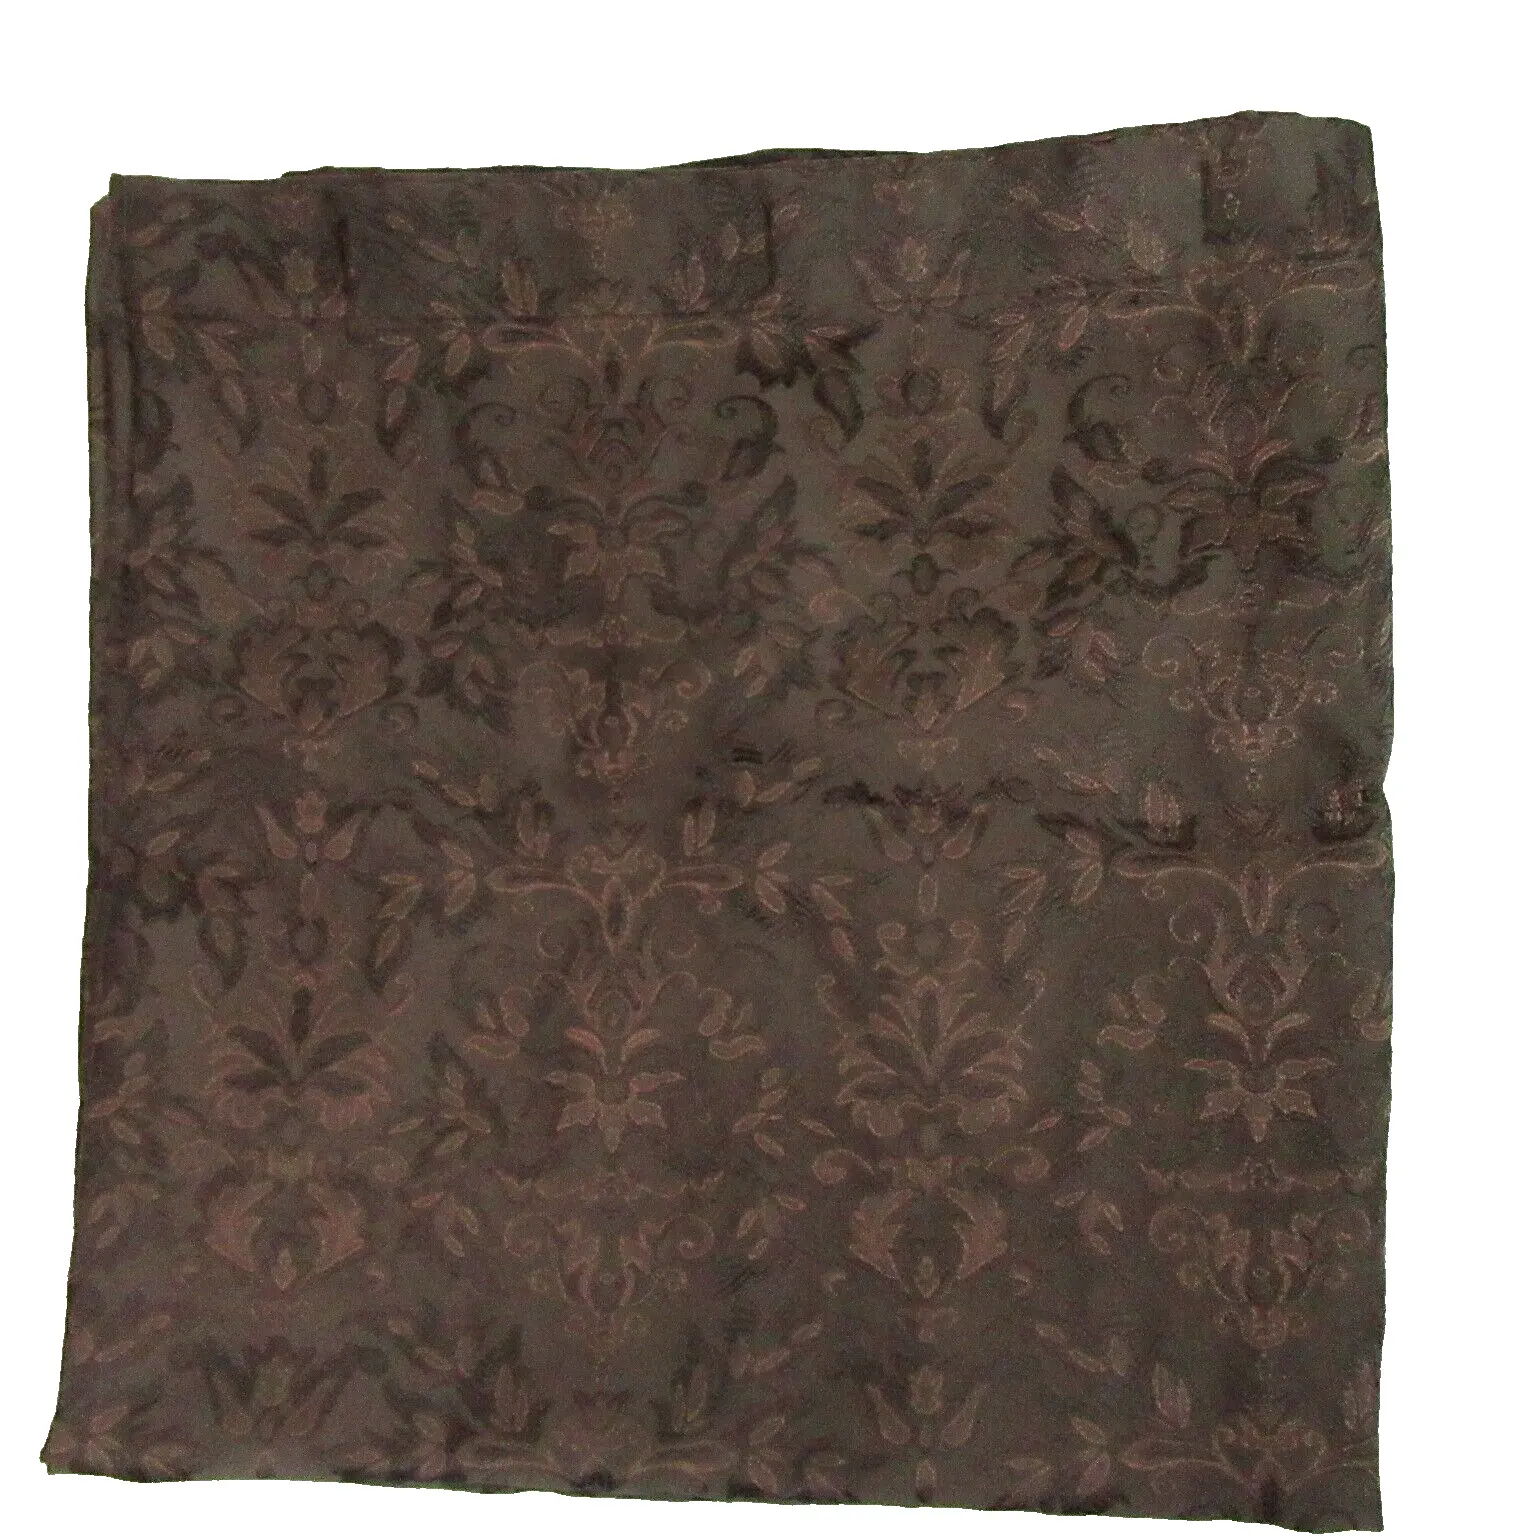 CROSCILL Floral Damask Chocolate Brown Shower Curtain - $32.00